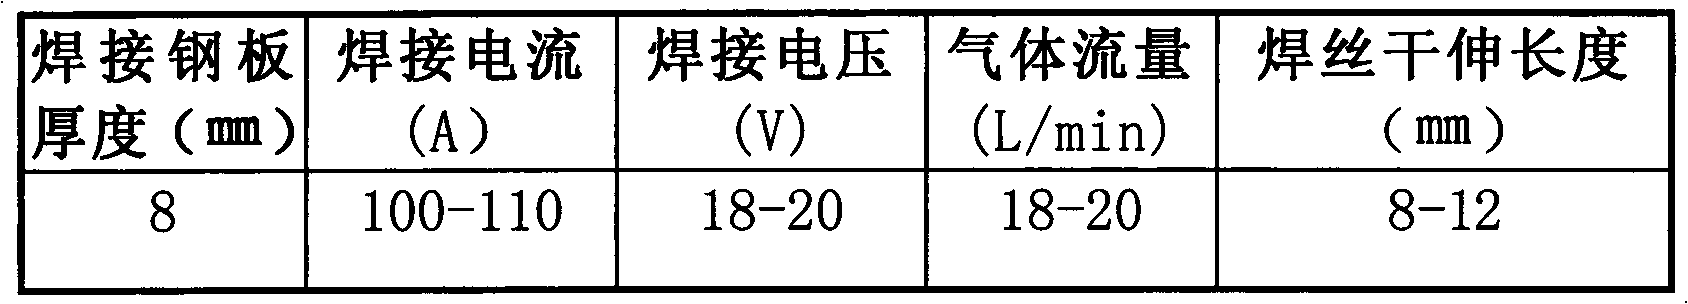 Welding method of dissimilar steels such as 917 low-magnetic steel and CCSB steel